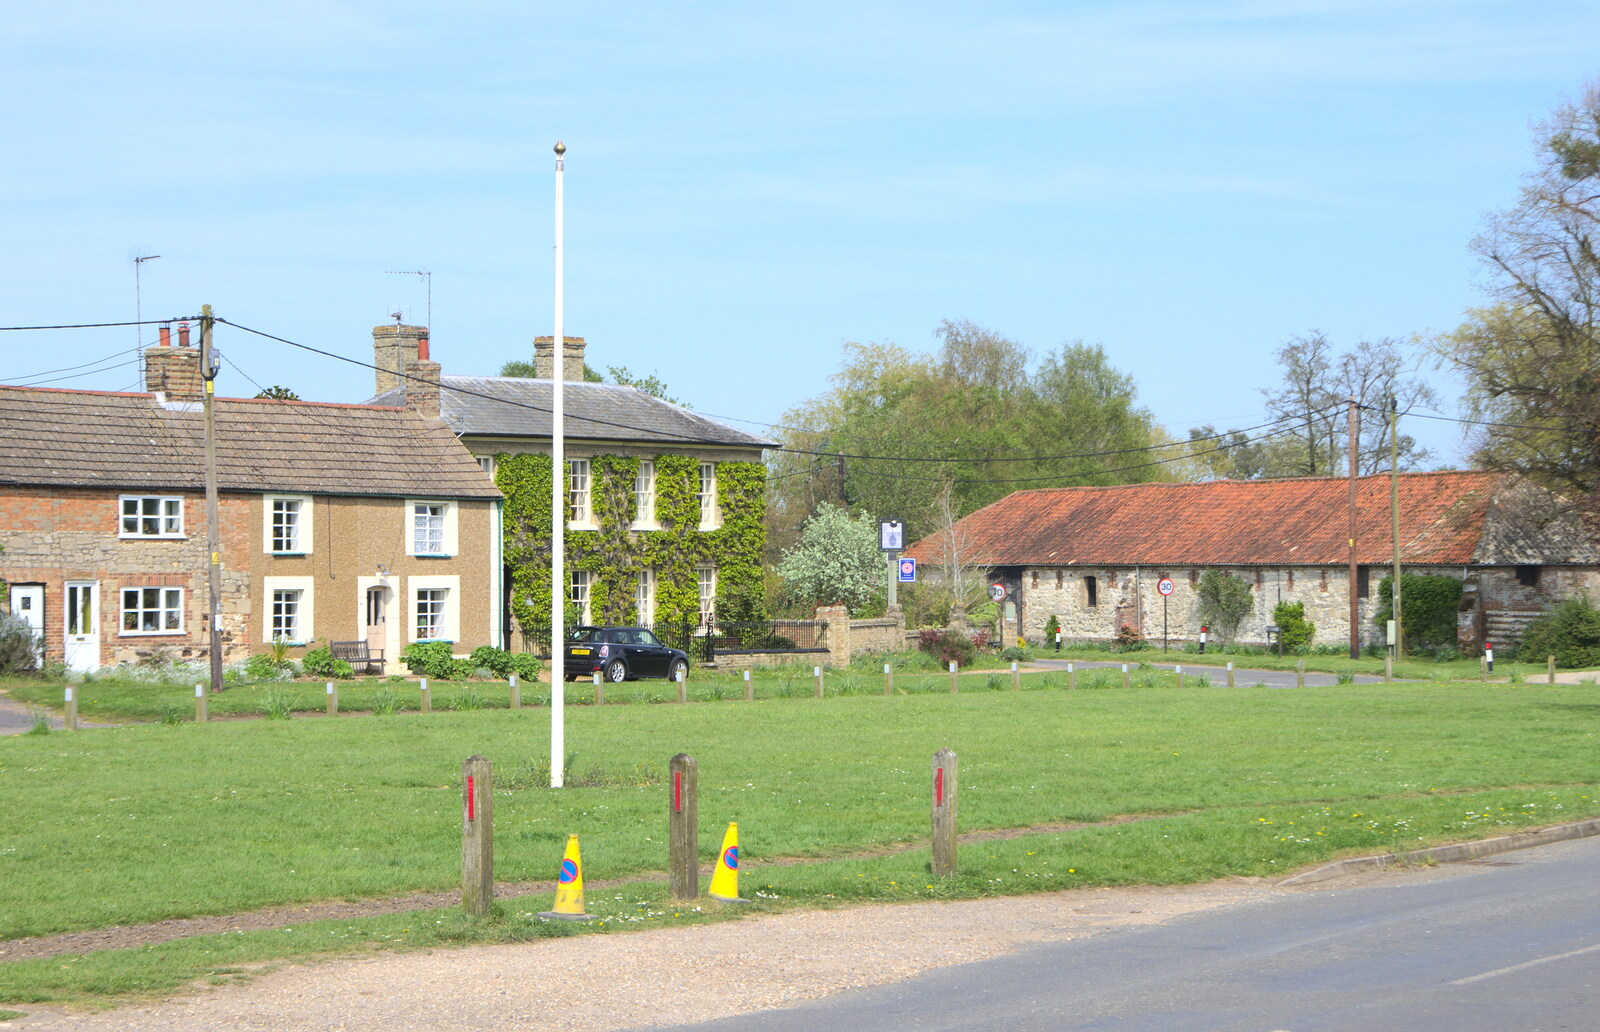 Shouldham's village green from The BSCC Cycling Weekender, Outwell, West Norfolk - 7th May 2016